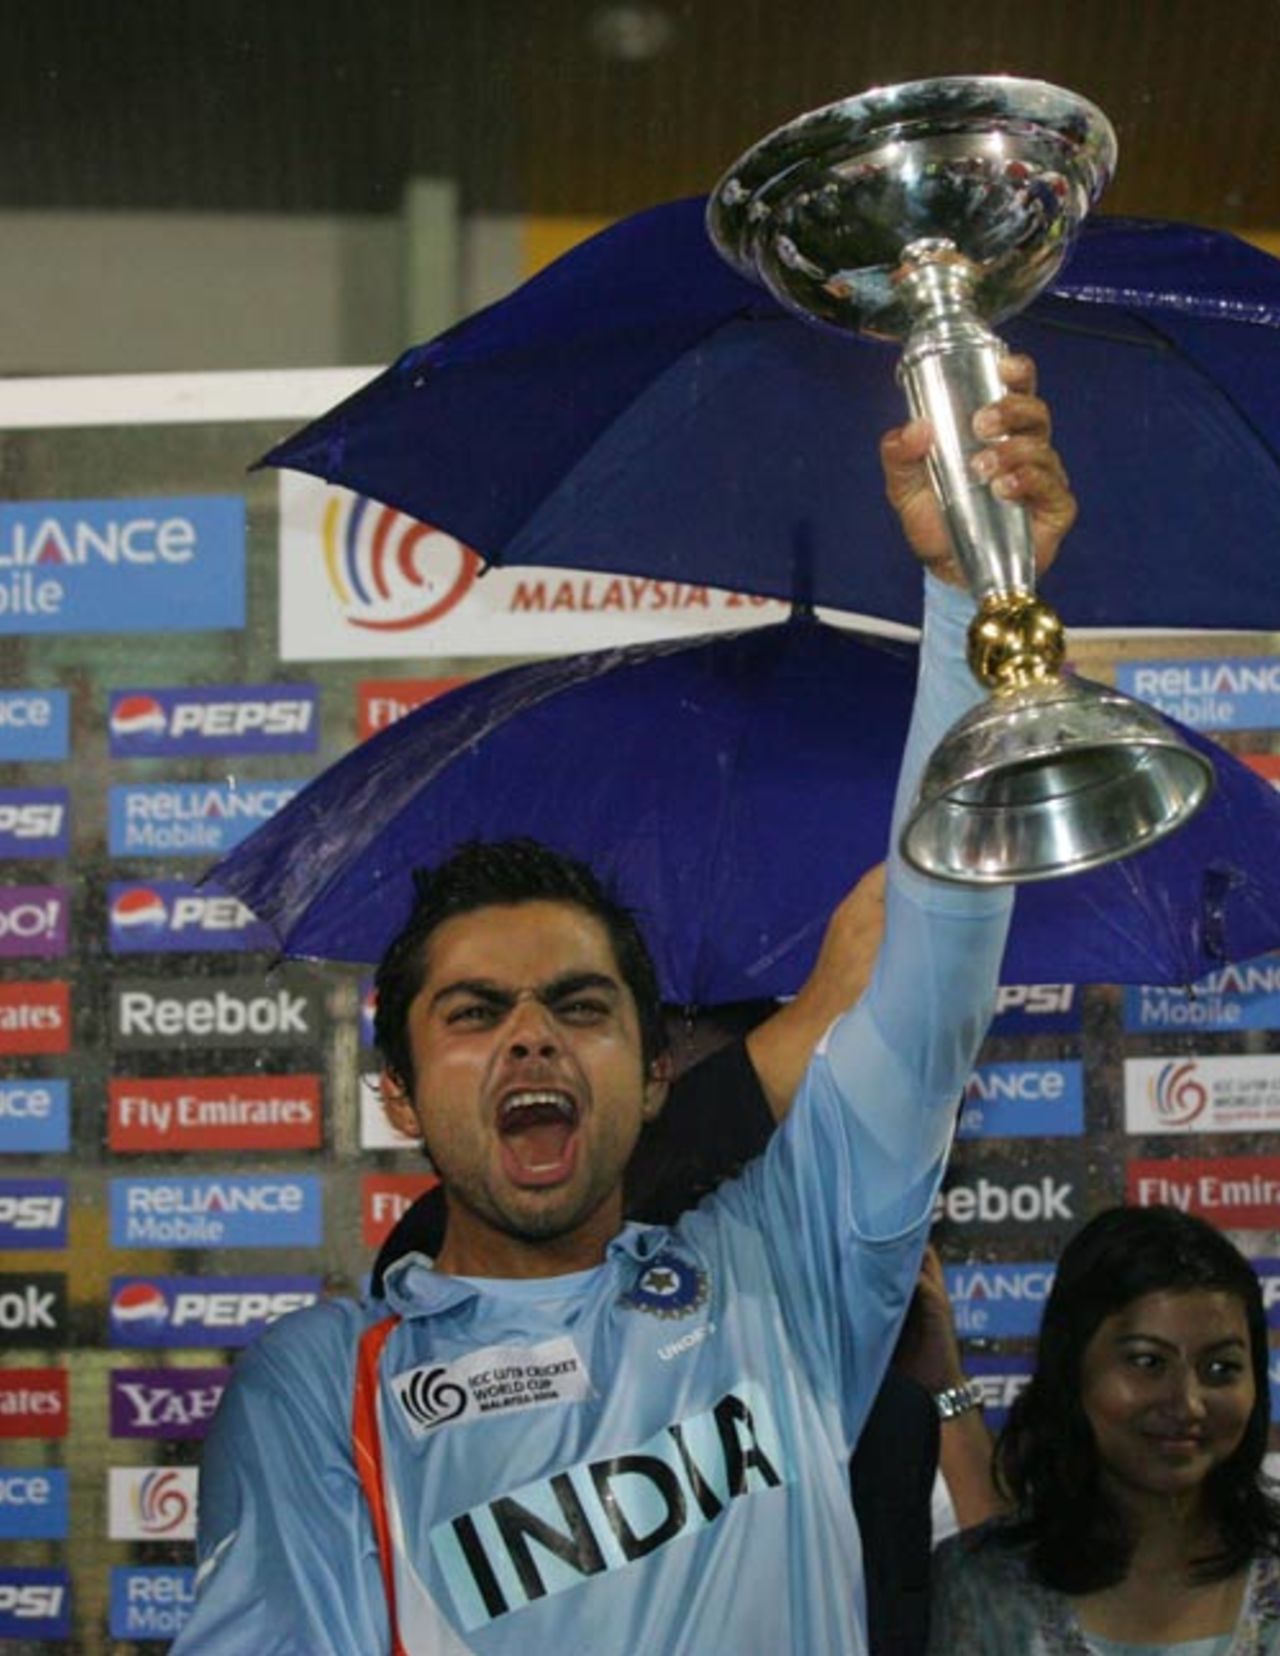 Virat Kohli, captain of the victorious Indian team, holds aloft the trophy, India v South Africa, Under-19 World Cup final, Kuala Lumpur, March 2, 2008 
